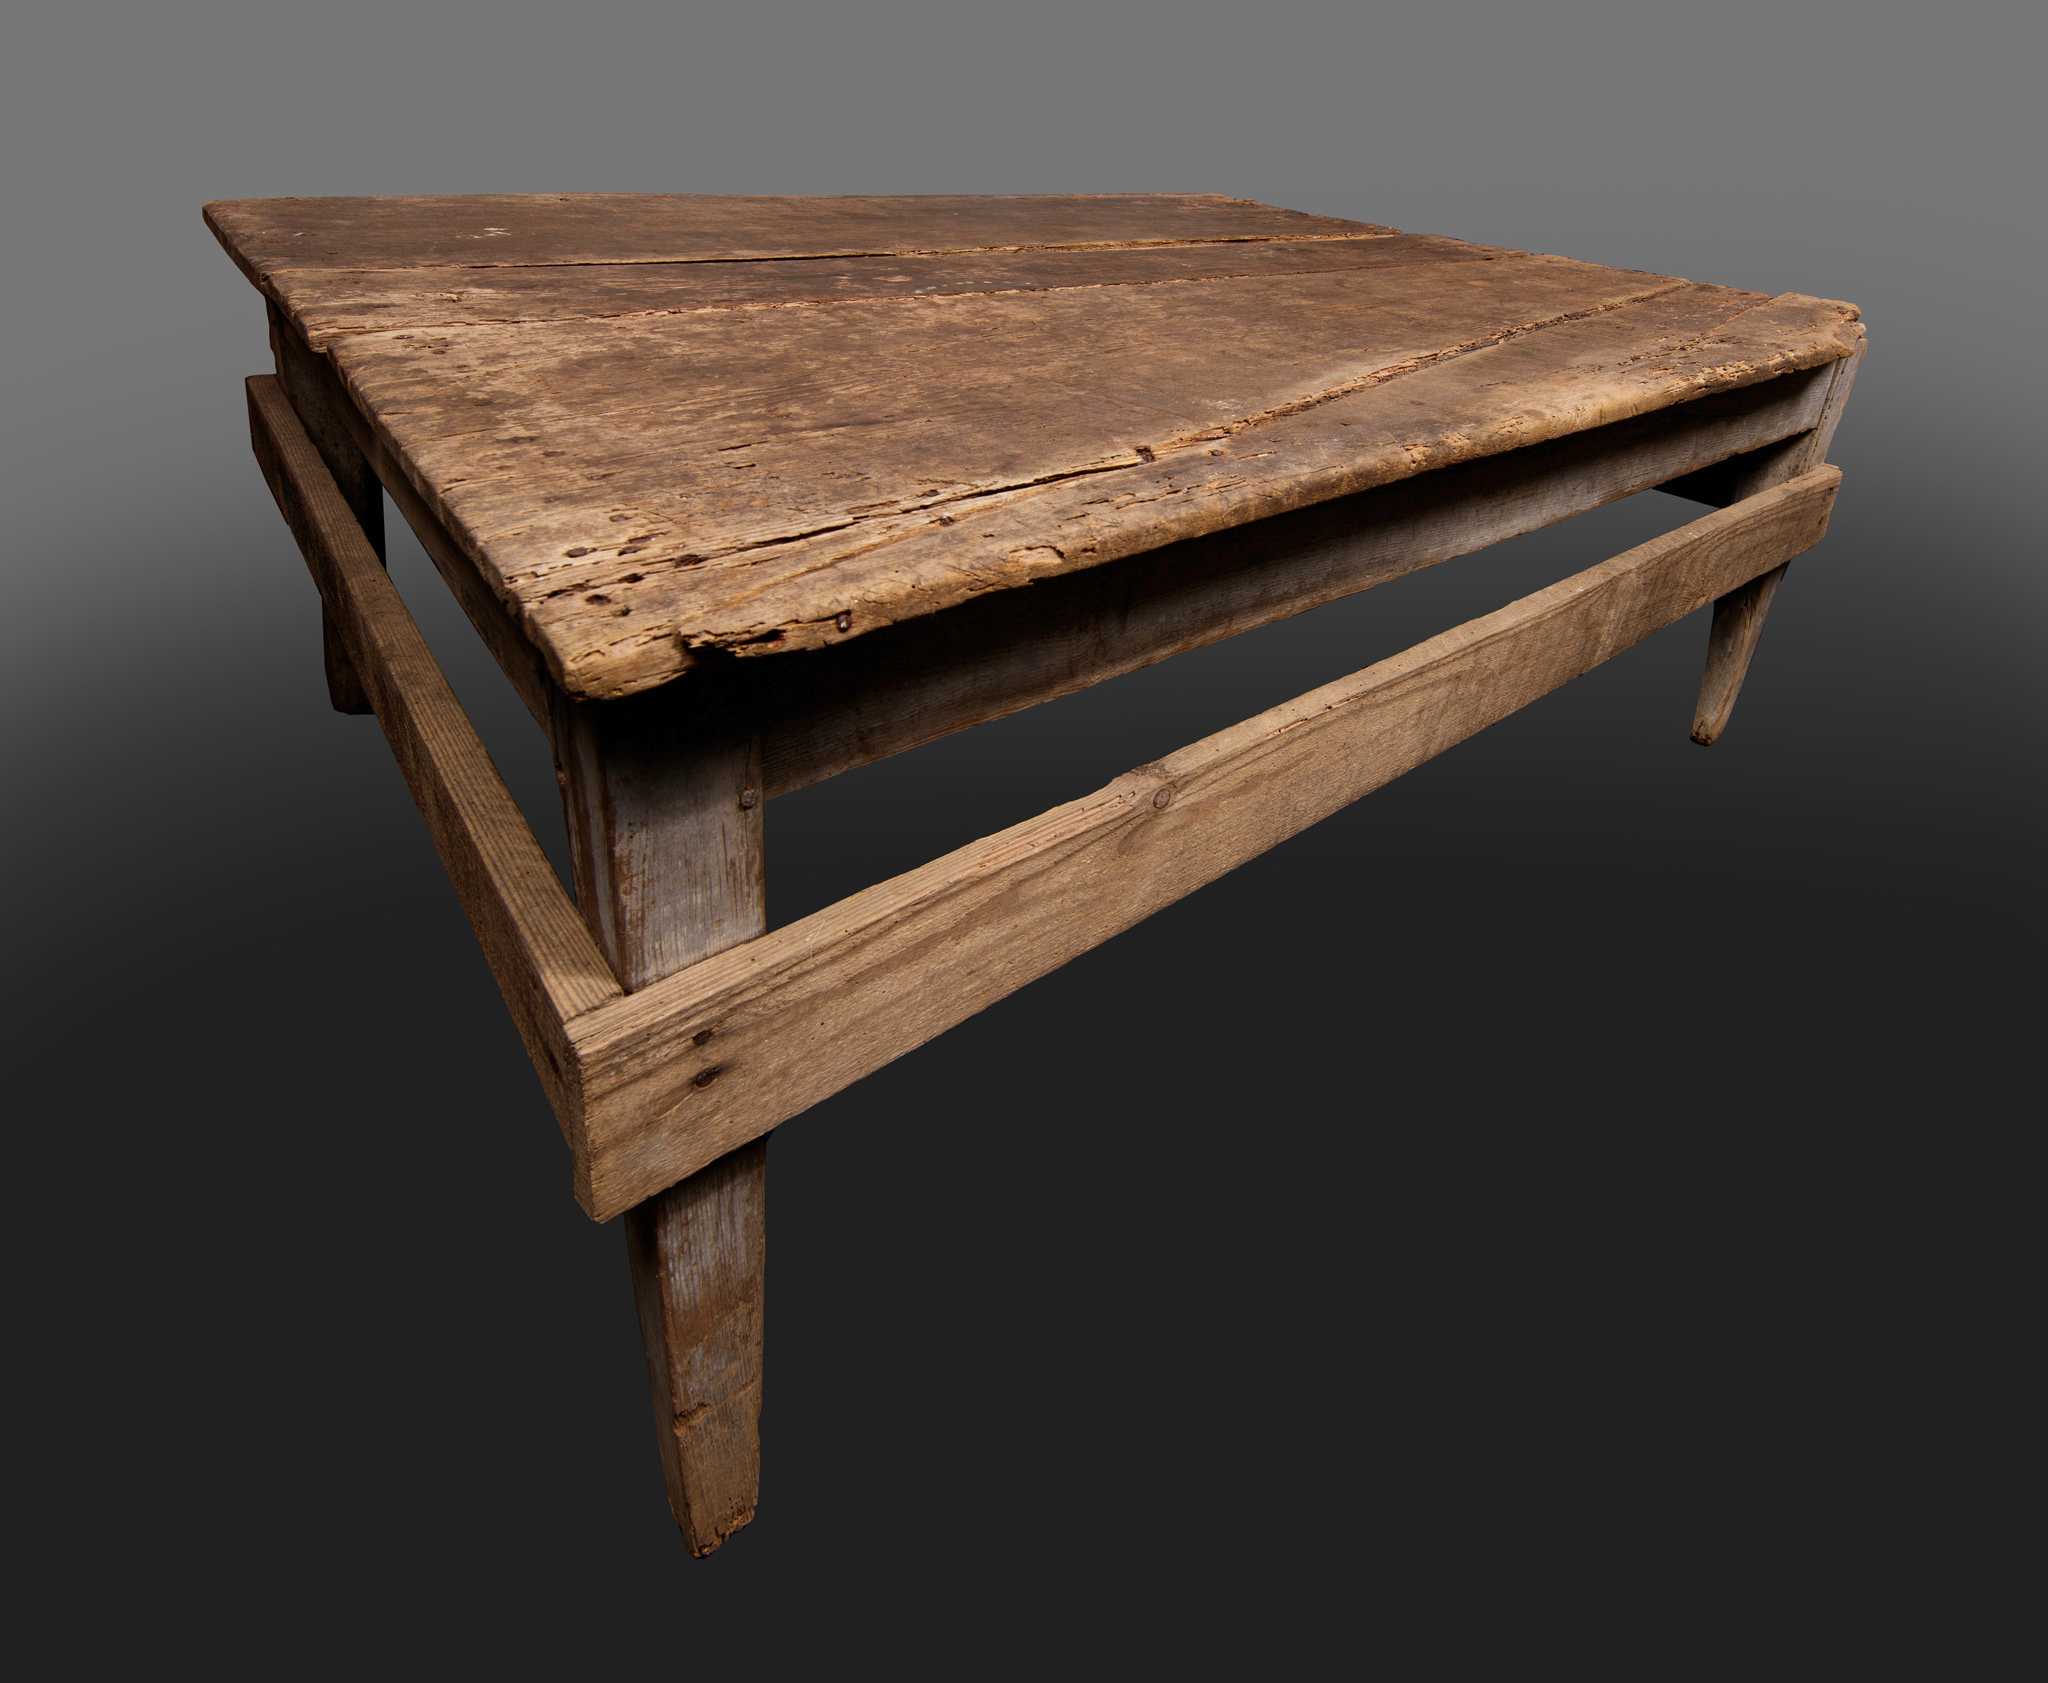 A wooden table used at Cedar Grove plantation in Edgefield County, South Carolina. The four-legged table is made of yellow pine. The table top consists of three (3) machine-milled boards finished with scrub plane on the underside and with a cabinetmaker's plane on the top side. The boards are joined with full-length tongue and groove joints, and the top is nailed to the apron. The four legs are a tapered square shape and are attached to the apron with a half-haunched offset split double mortise and tenon construction. The stretchers nailed around the outside of the legs are a later addition and are made from red oak.